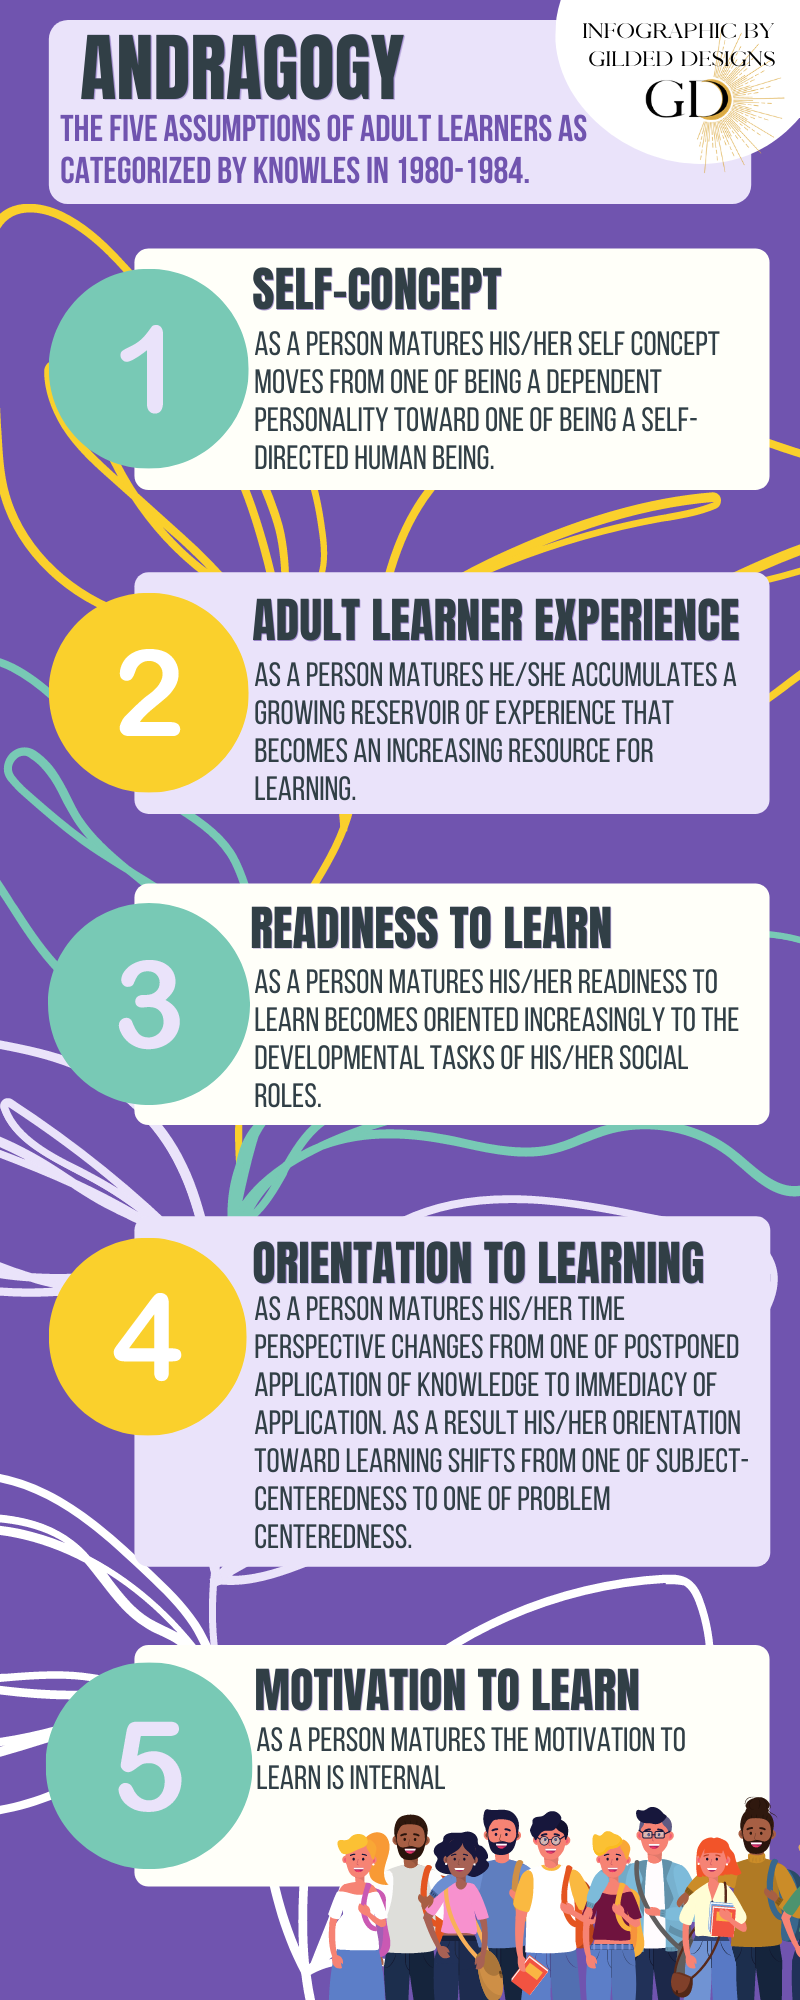 This is an infographic on Andragogy 2